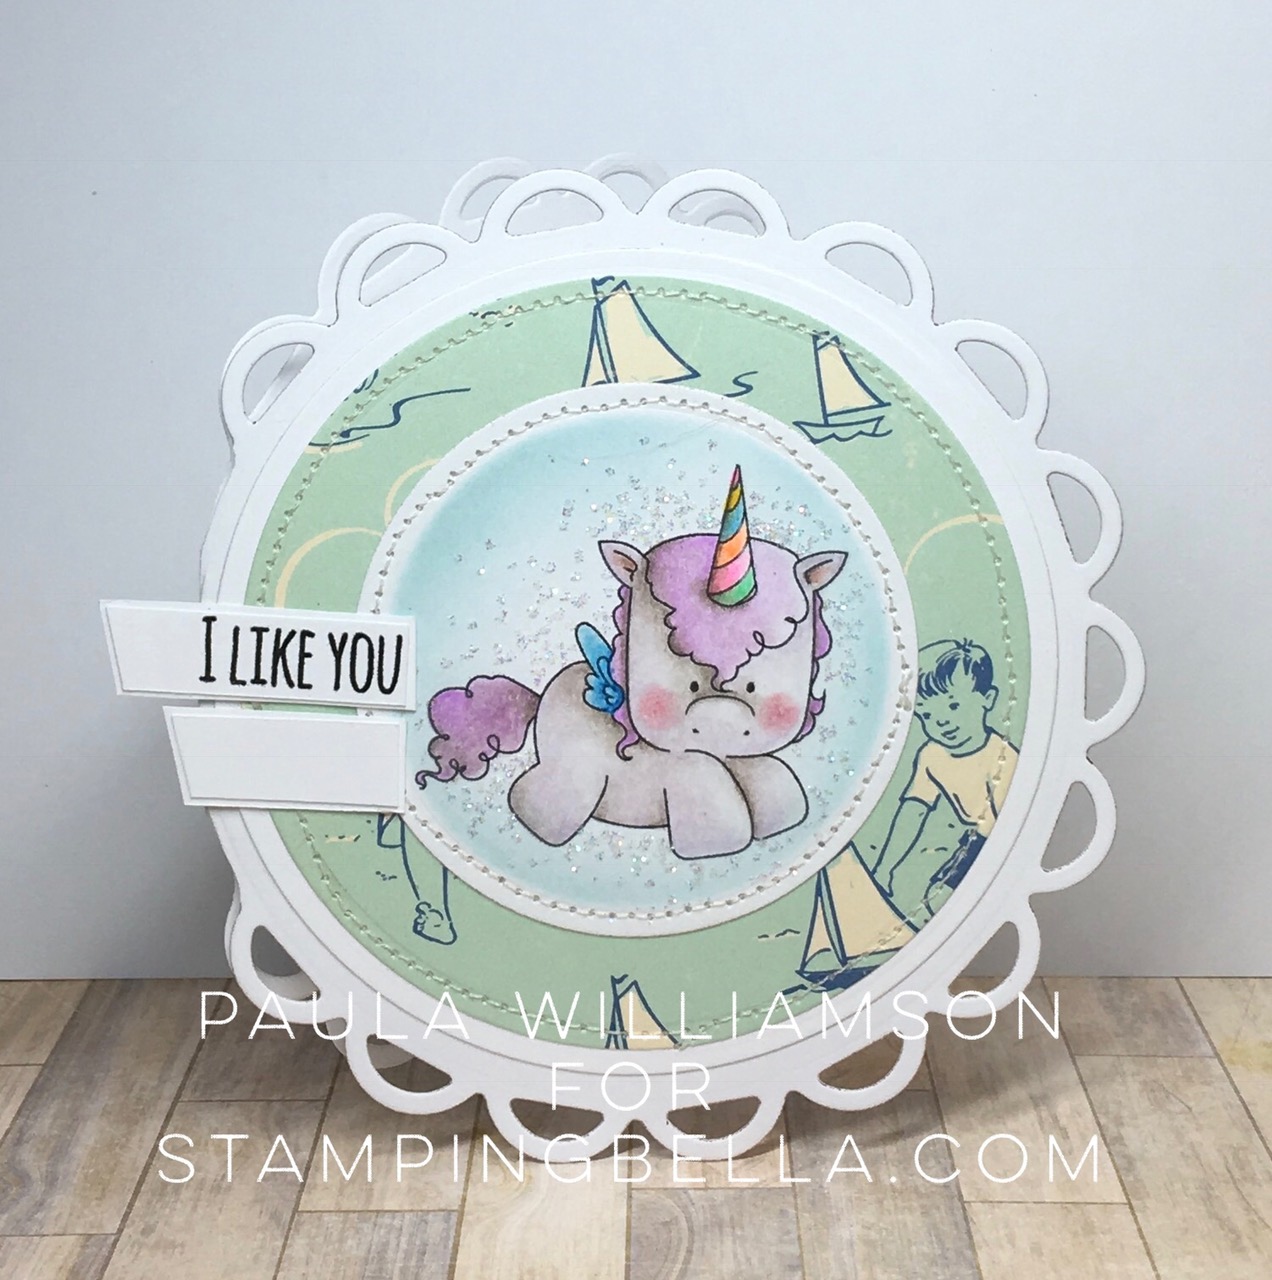 Stamping Bella JANUARY 2017 rubber stamp release-SET OF UNICORNS card by Paula Williamson